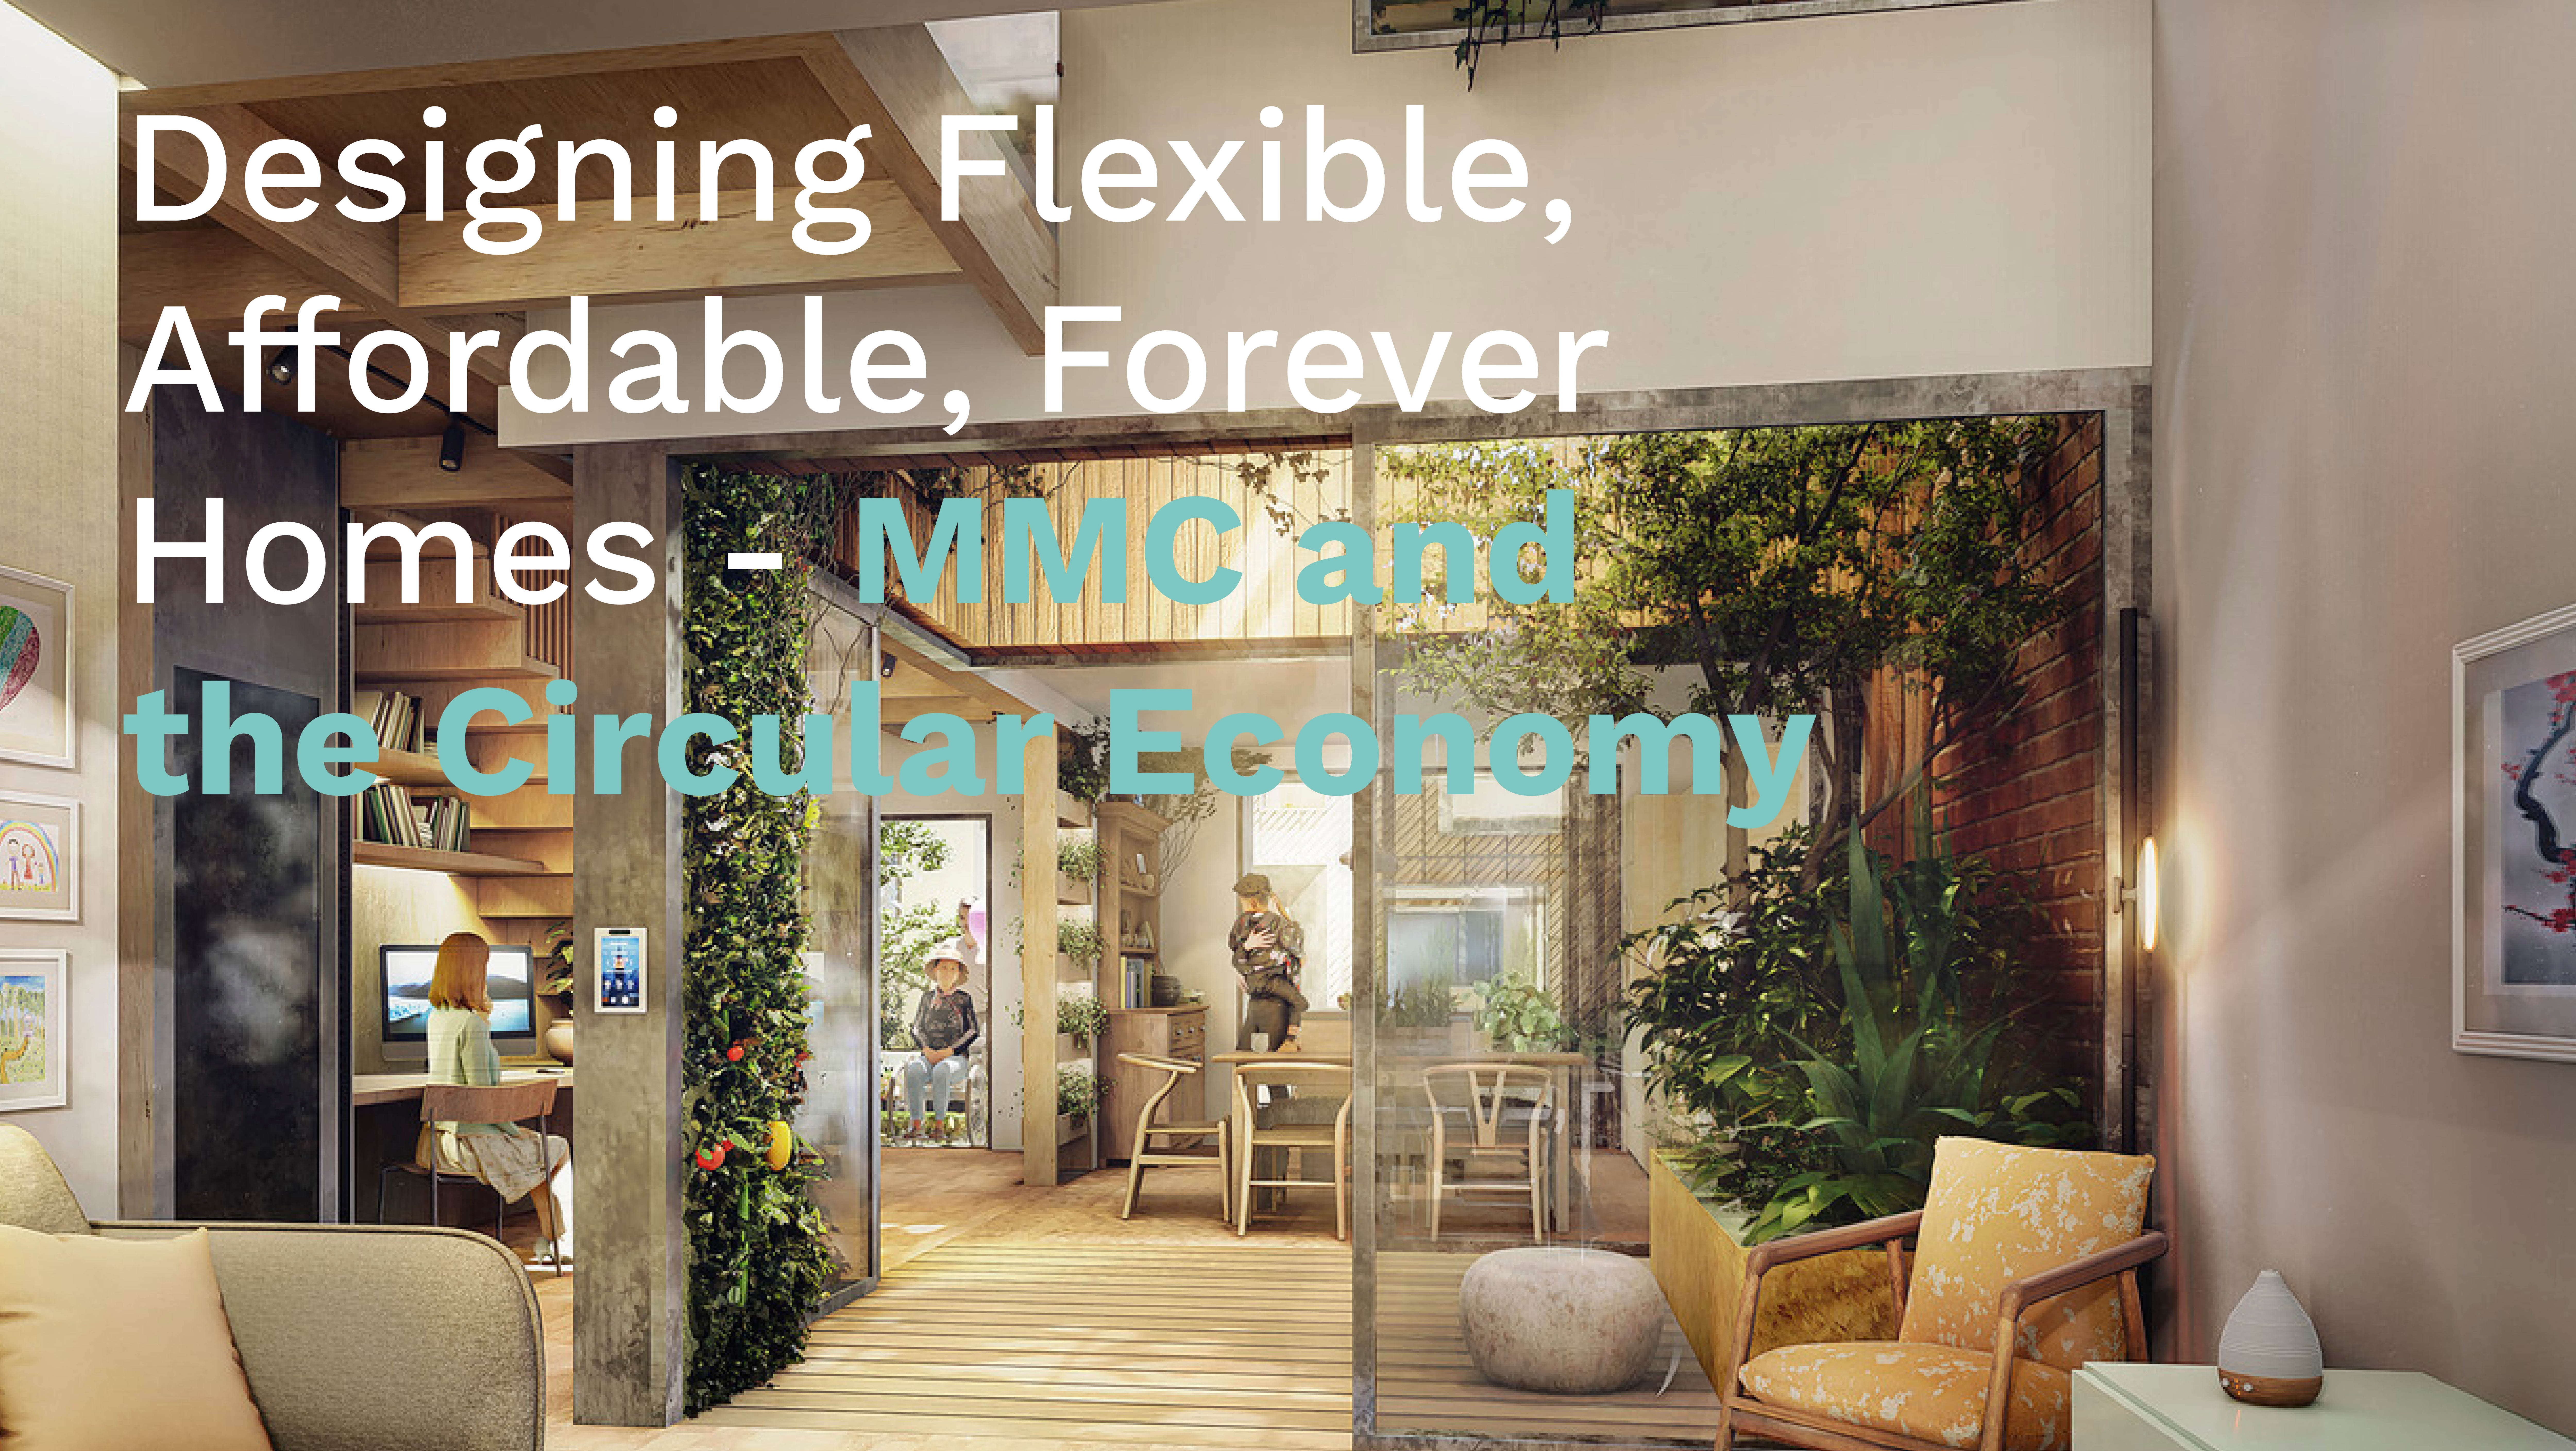 Flexible, Affordable, Forever Homes - MMC and the Circular Economy